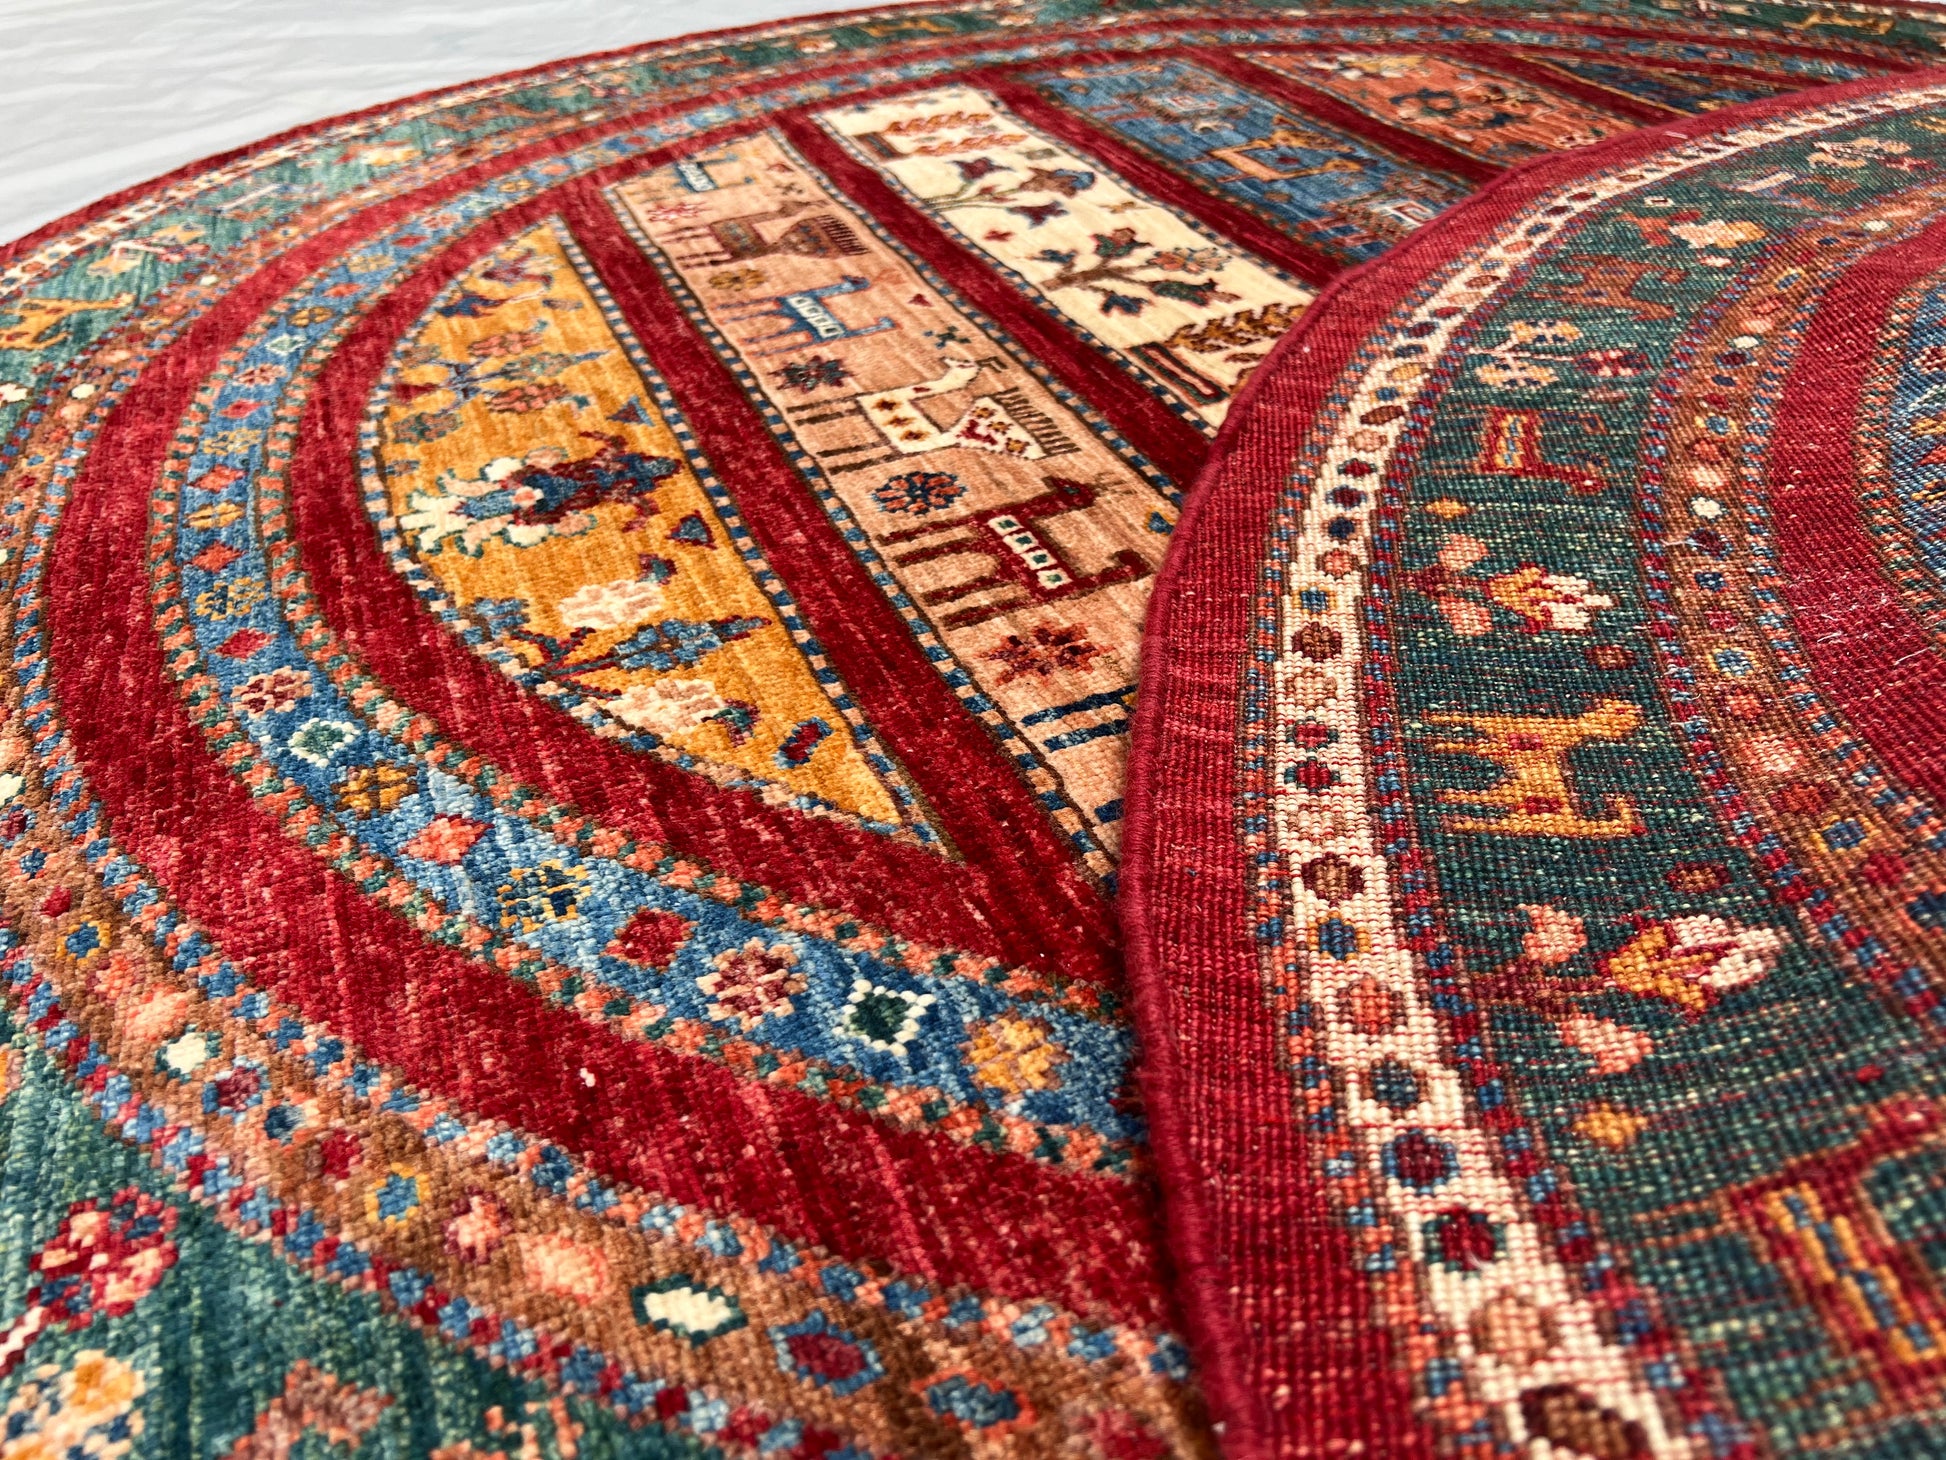 Afghan Hand Knotted/ Knitted Living Room/Dining Room Chob Rang(Shawl Design) Round Area Rug 5.0ftx4.9ft (CH-M-5X4.9-9-R-N) (Kabul) - Kabul Rugs